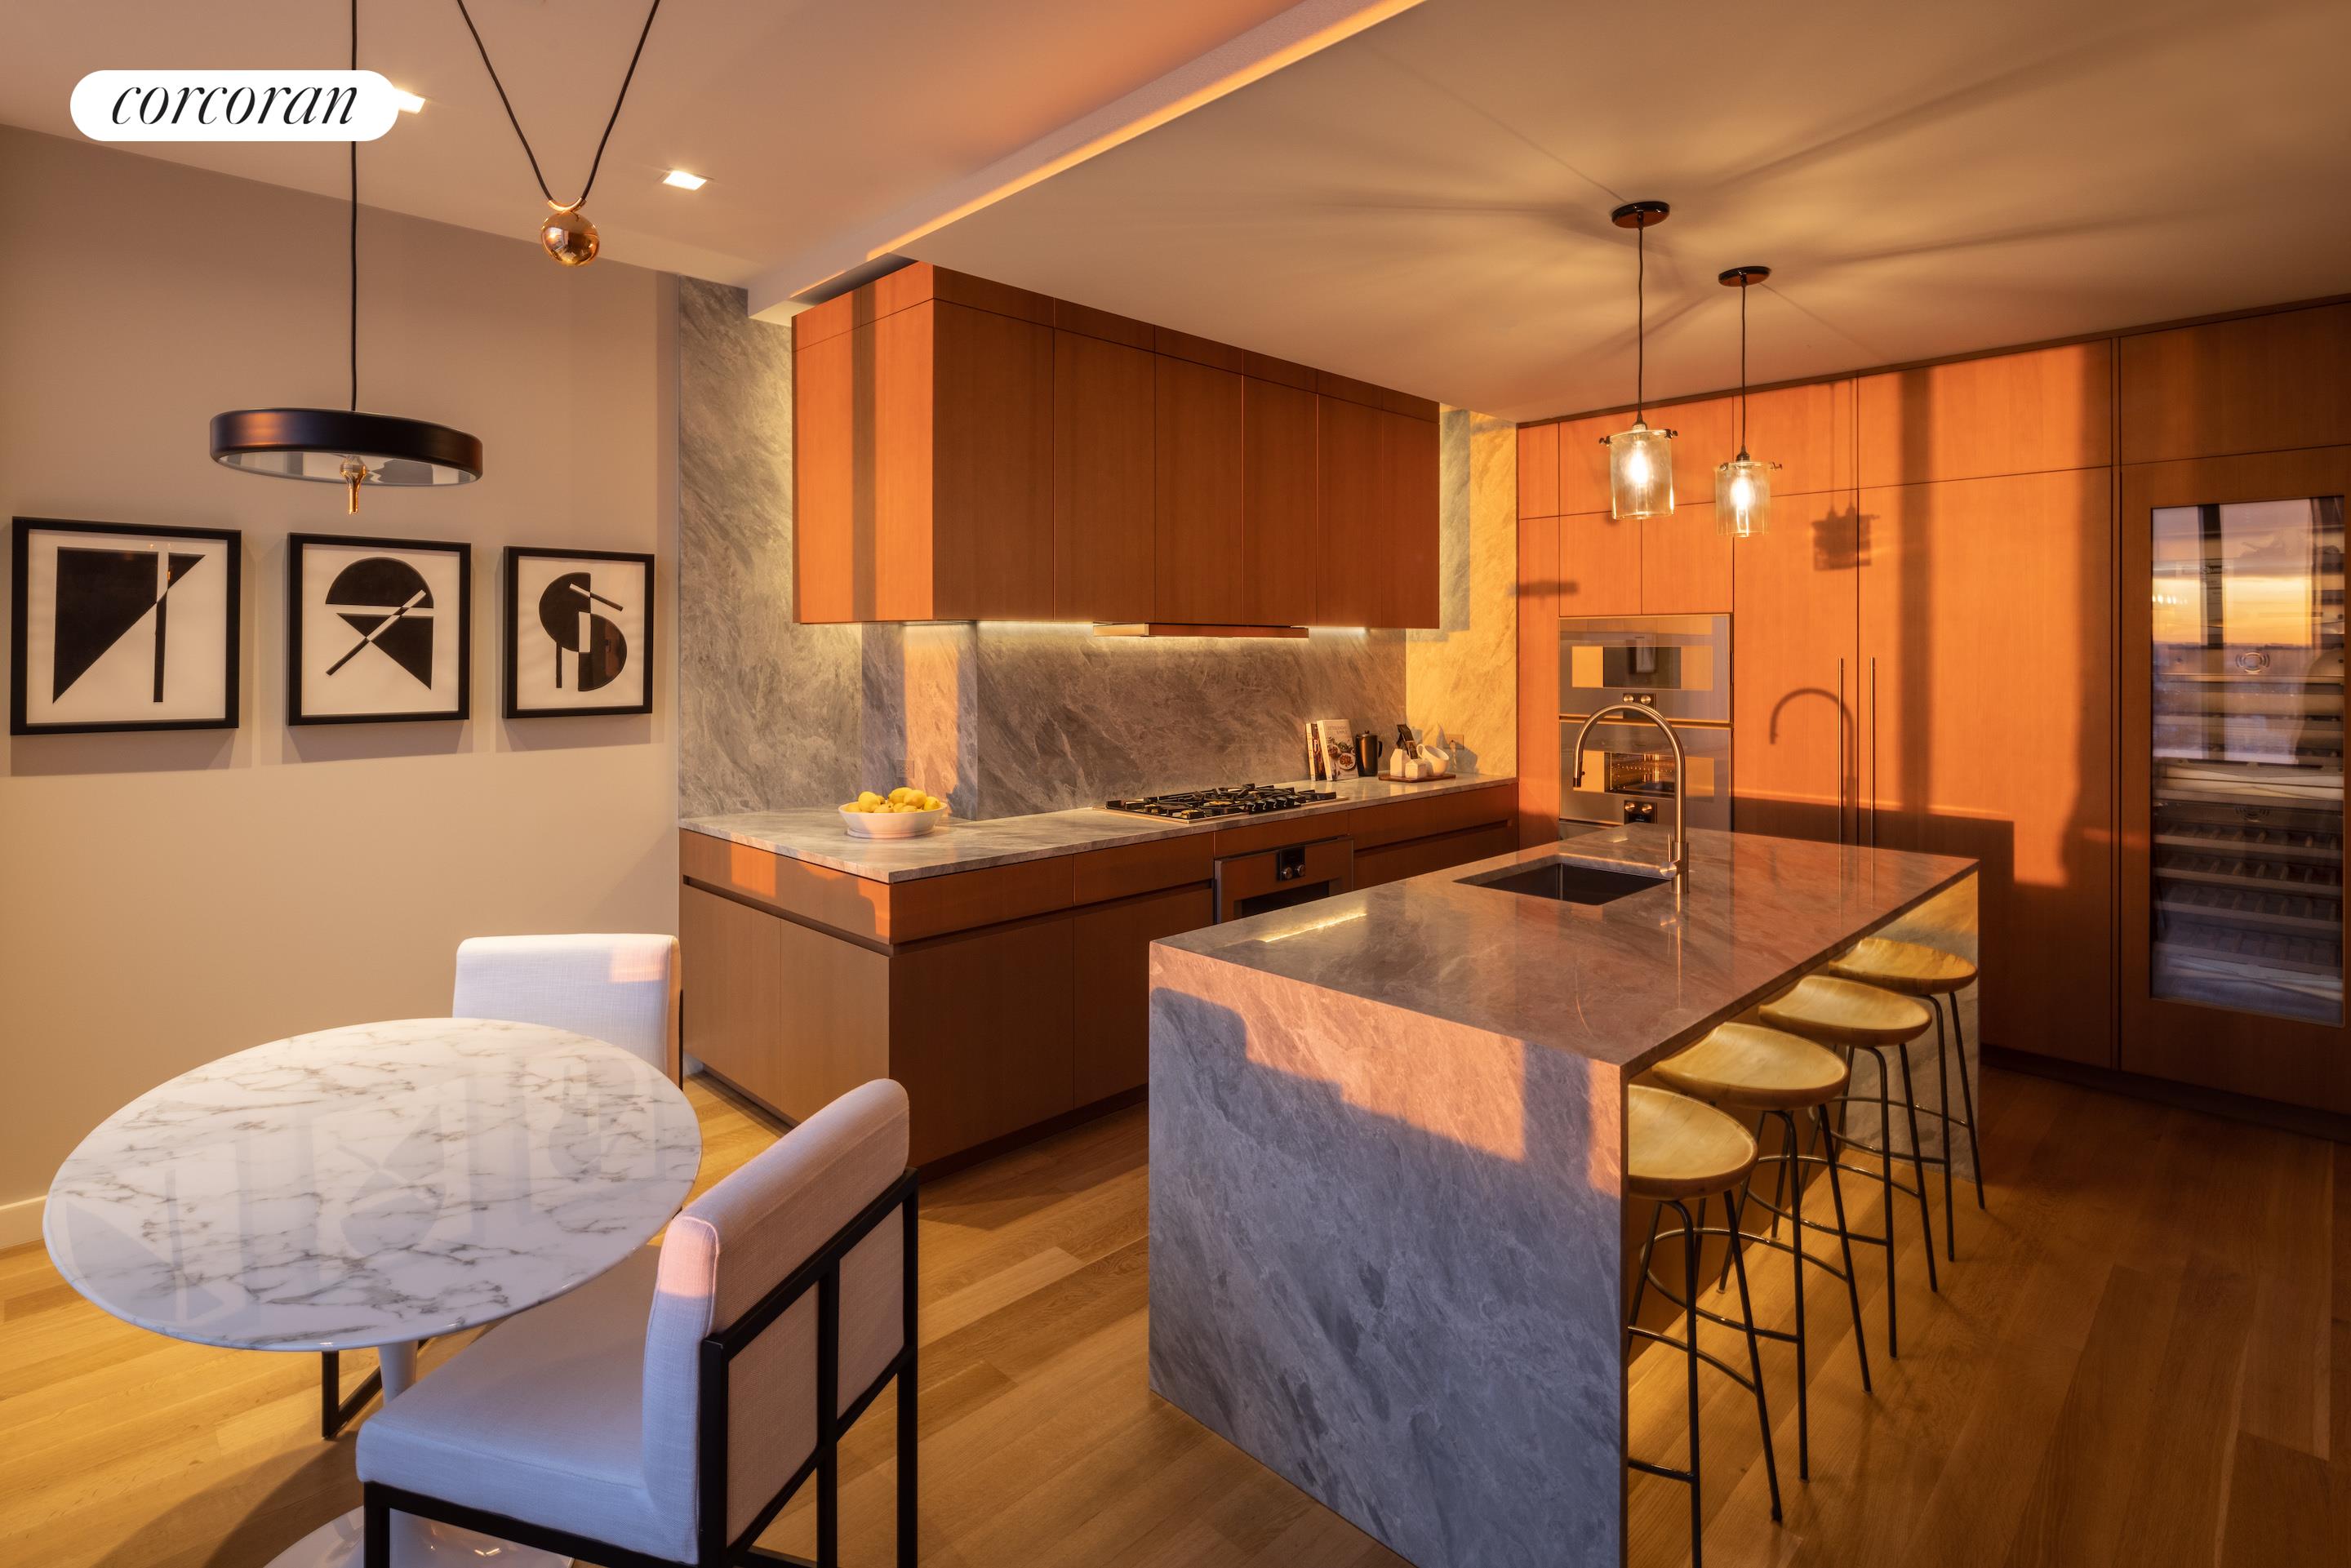 611 West 56th Street 10, Middle West Side, Midtown West, NYC - 4 Bedrooms  
4.5 Bathrooms  
7 Rooms - 